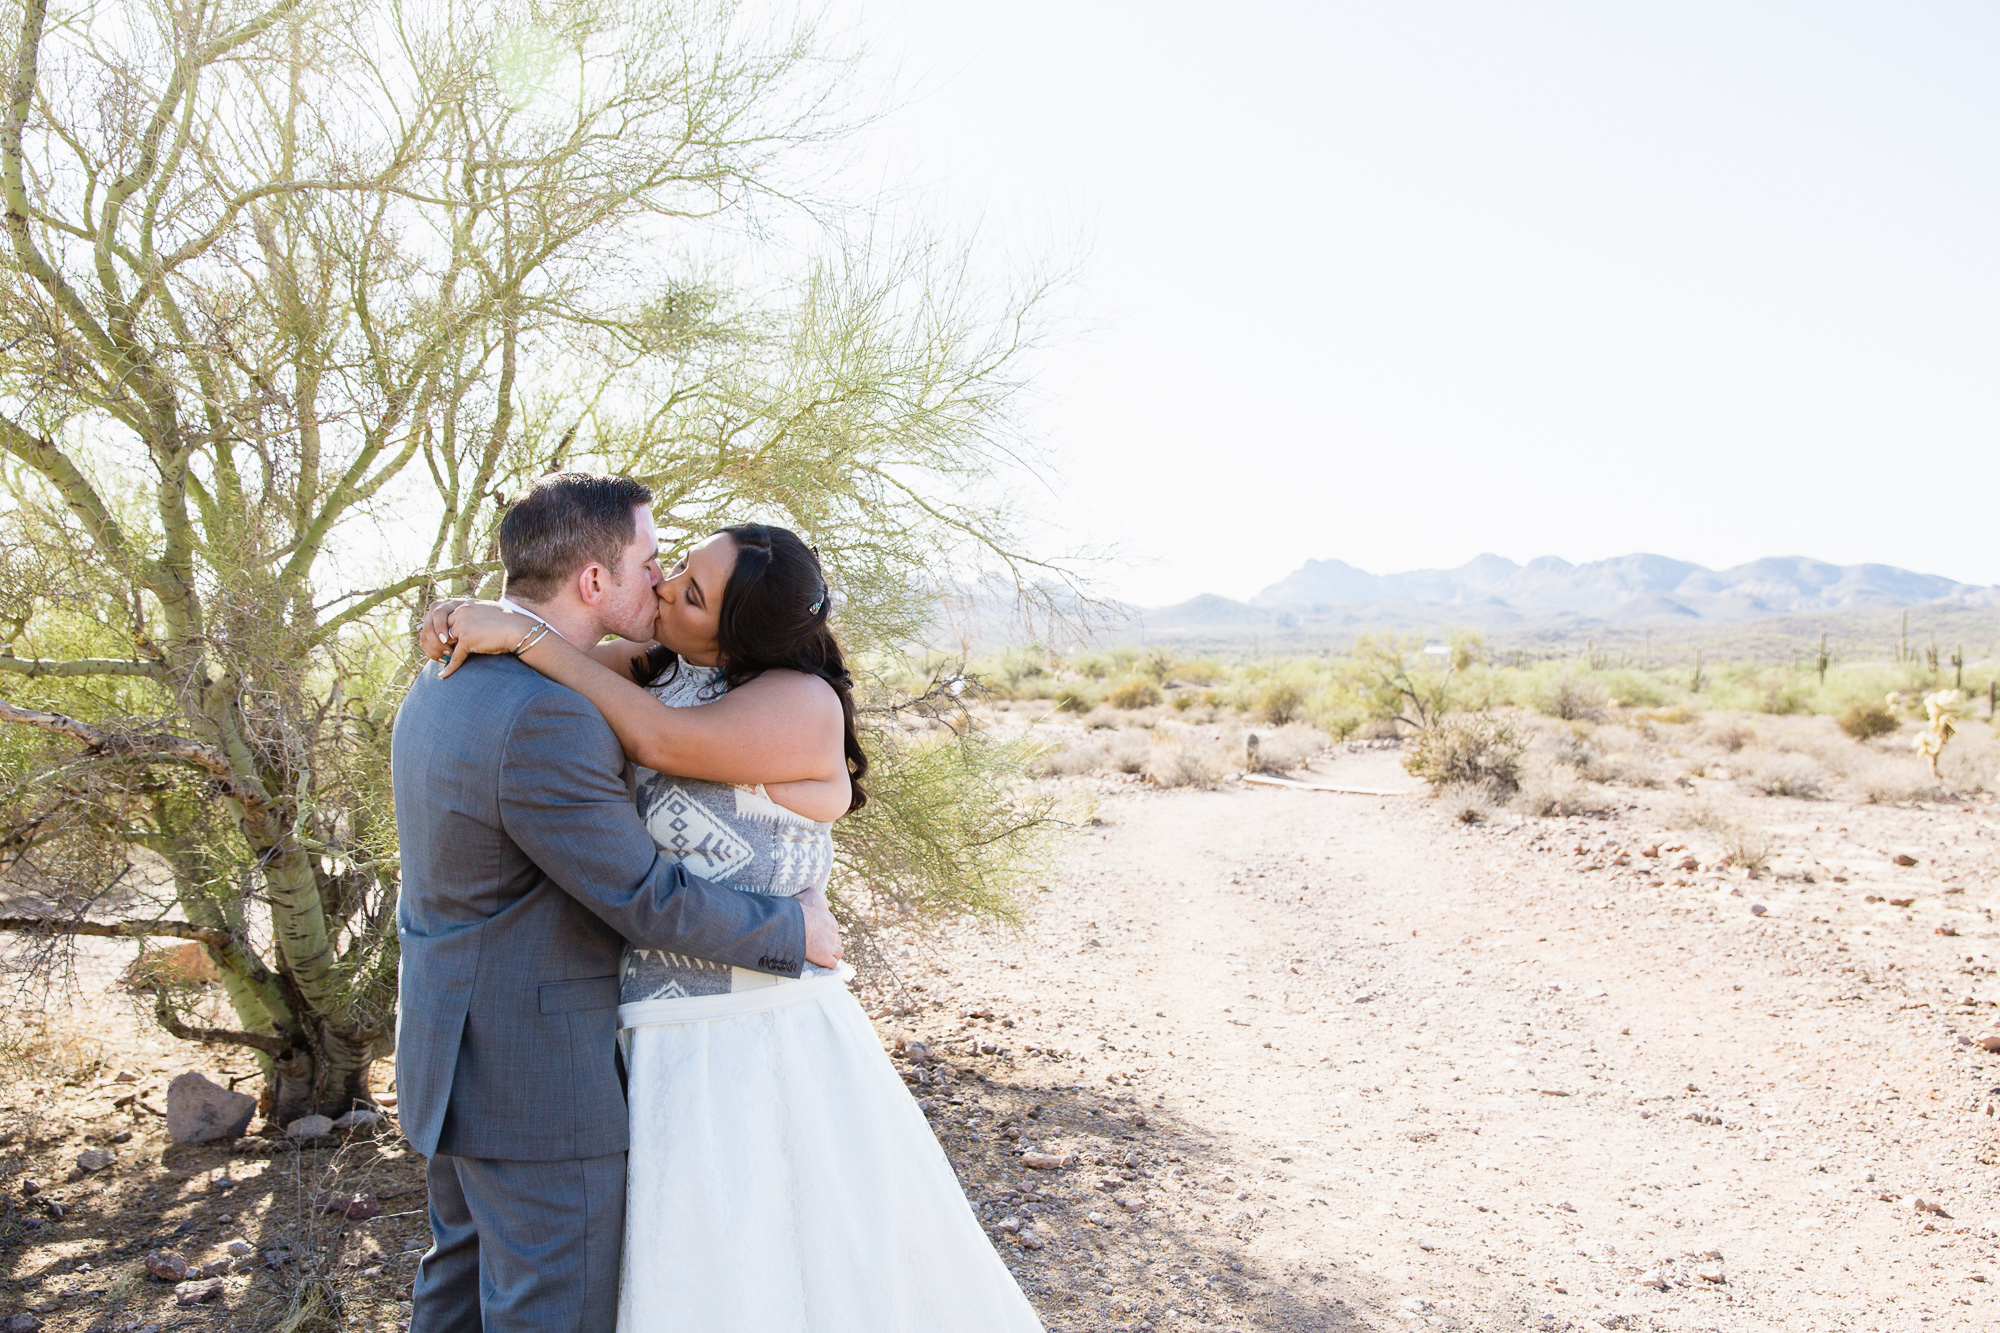 Bride and groom at their Lost Dutchman State Park wedding by Arizona wedding photographers PMA Photography.